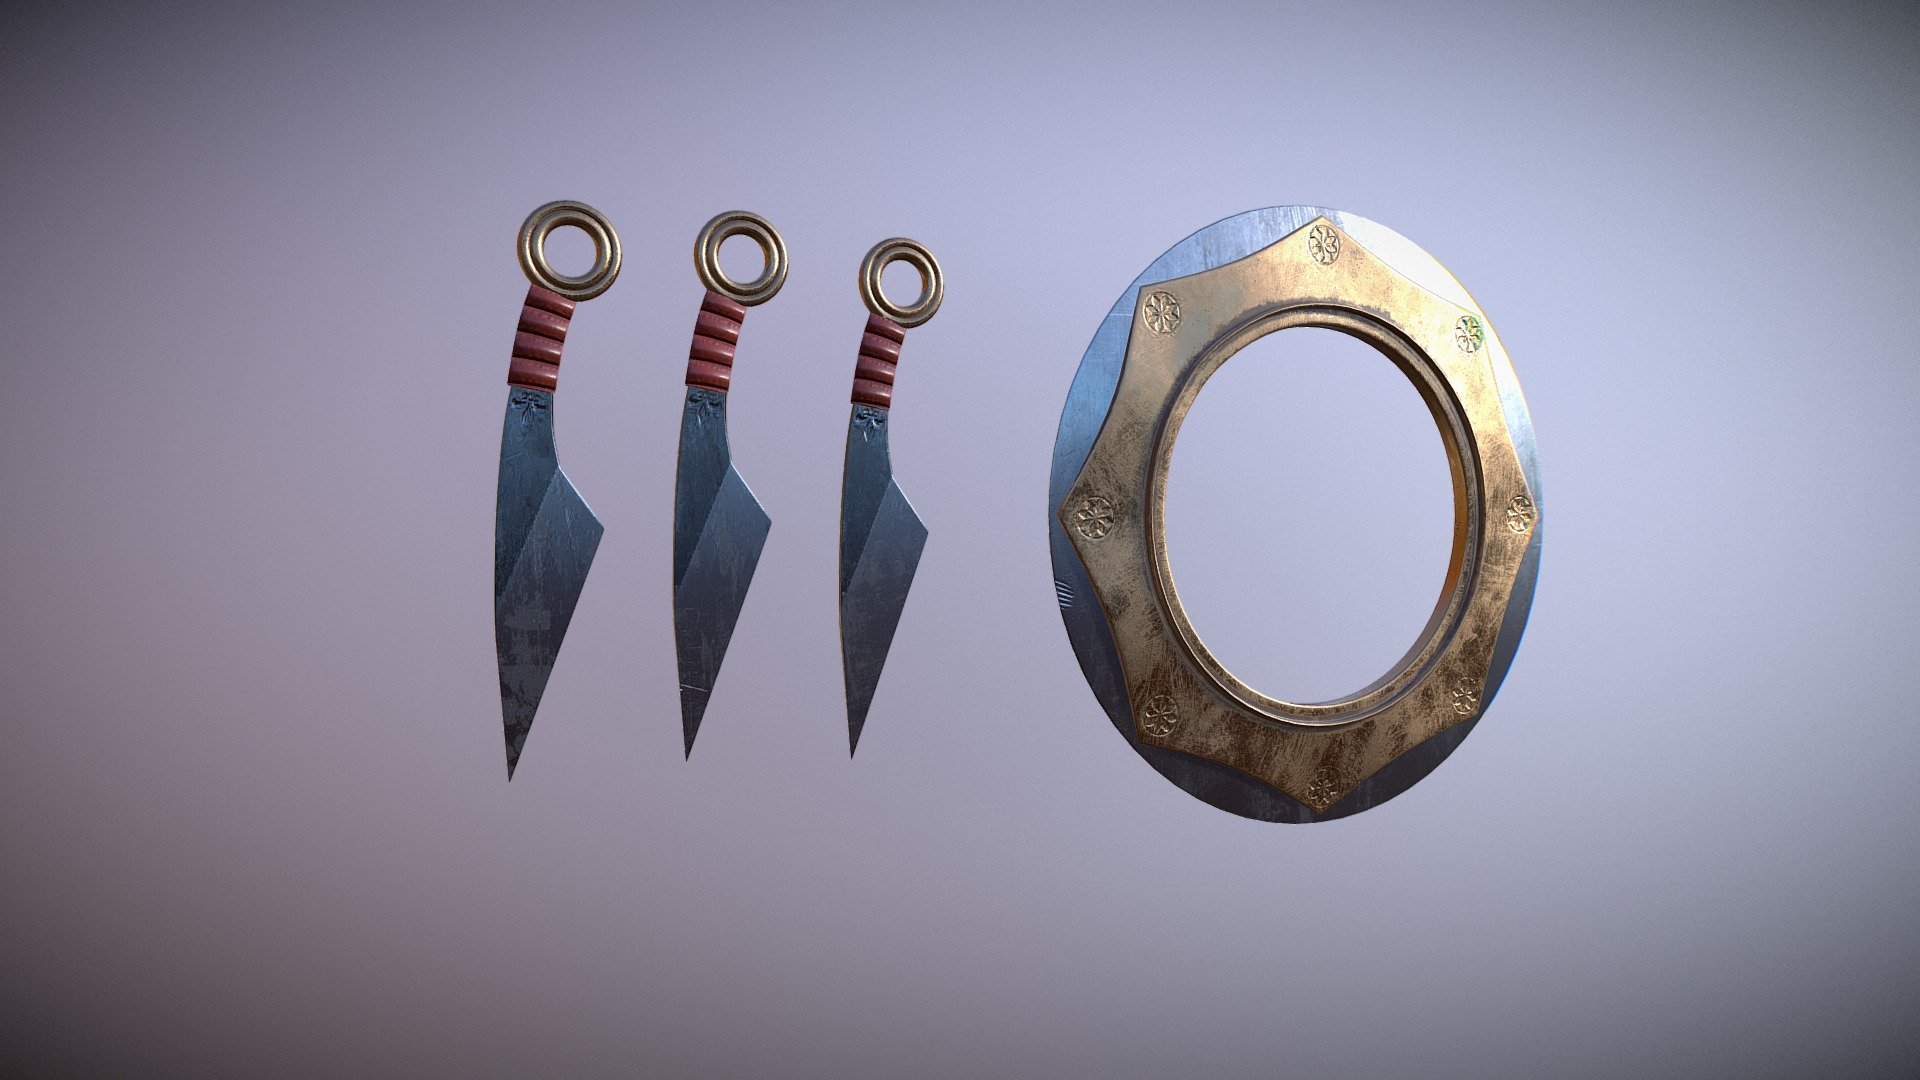 This weapon is part of the medieval weapons set. The set can be used in game development and is compatible with Unity and Unreal engines.

All of 22 models are able to be used in first person or third person projects.

Assets in the kit:
4 Blades
2 Shields
2 Axes
2 Spears
1 Bow
1 Quiver
1 Arrow
1 Arrow (broken)
1 Crossbow Arrow
1 Crossbow
1 Ring
1 Dagger
1 Hammer
1 Mace
1 Flail
1 Magic Staff - Throwing Weapons Set - 3D model by insya 3d model